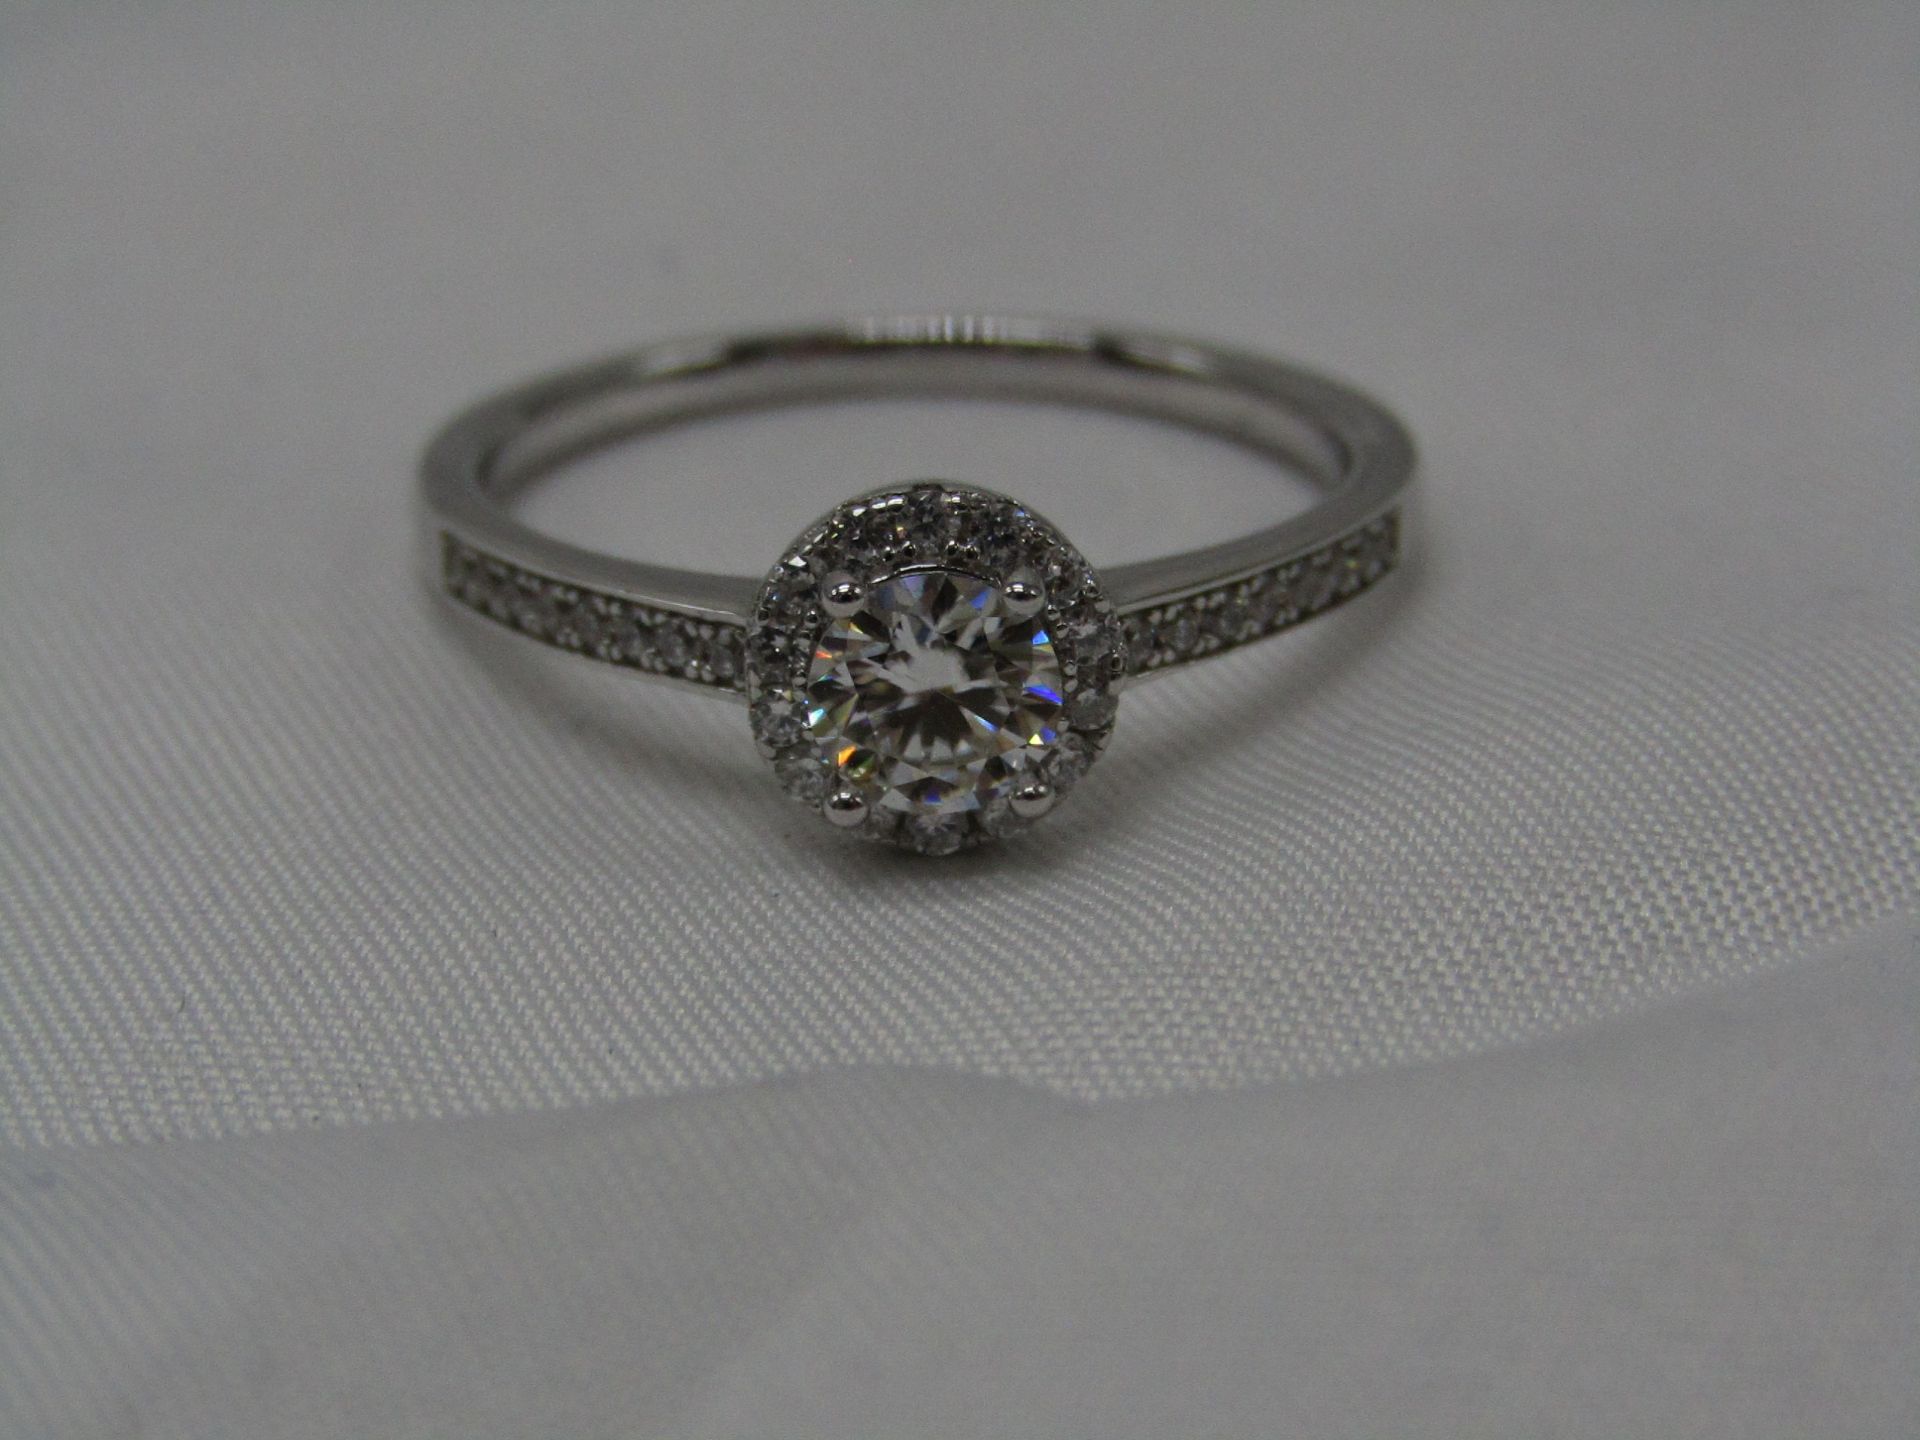 1 Carat Round Brilliant Cut Moissanite stone in a 925 Silver setting and band, new and comes with